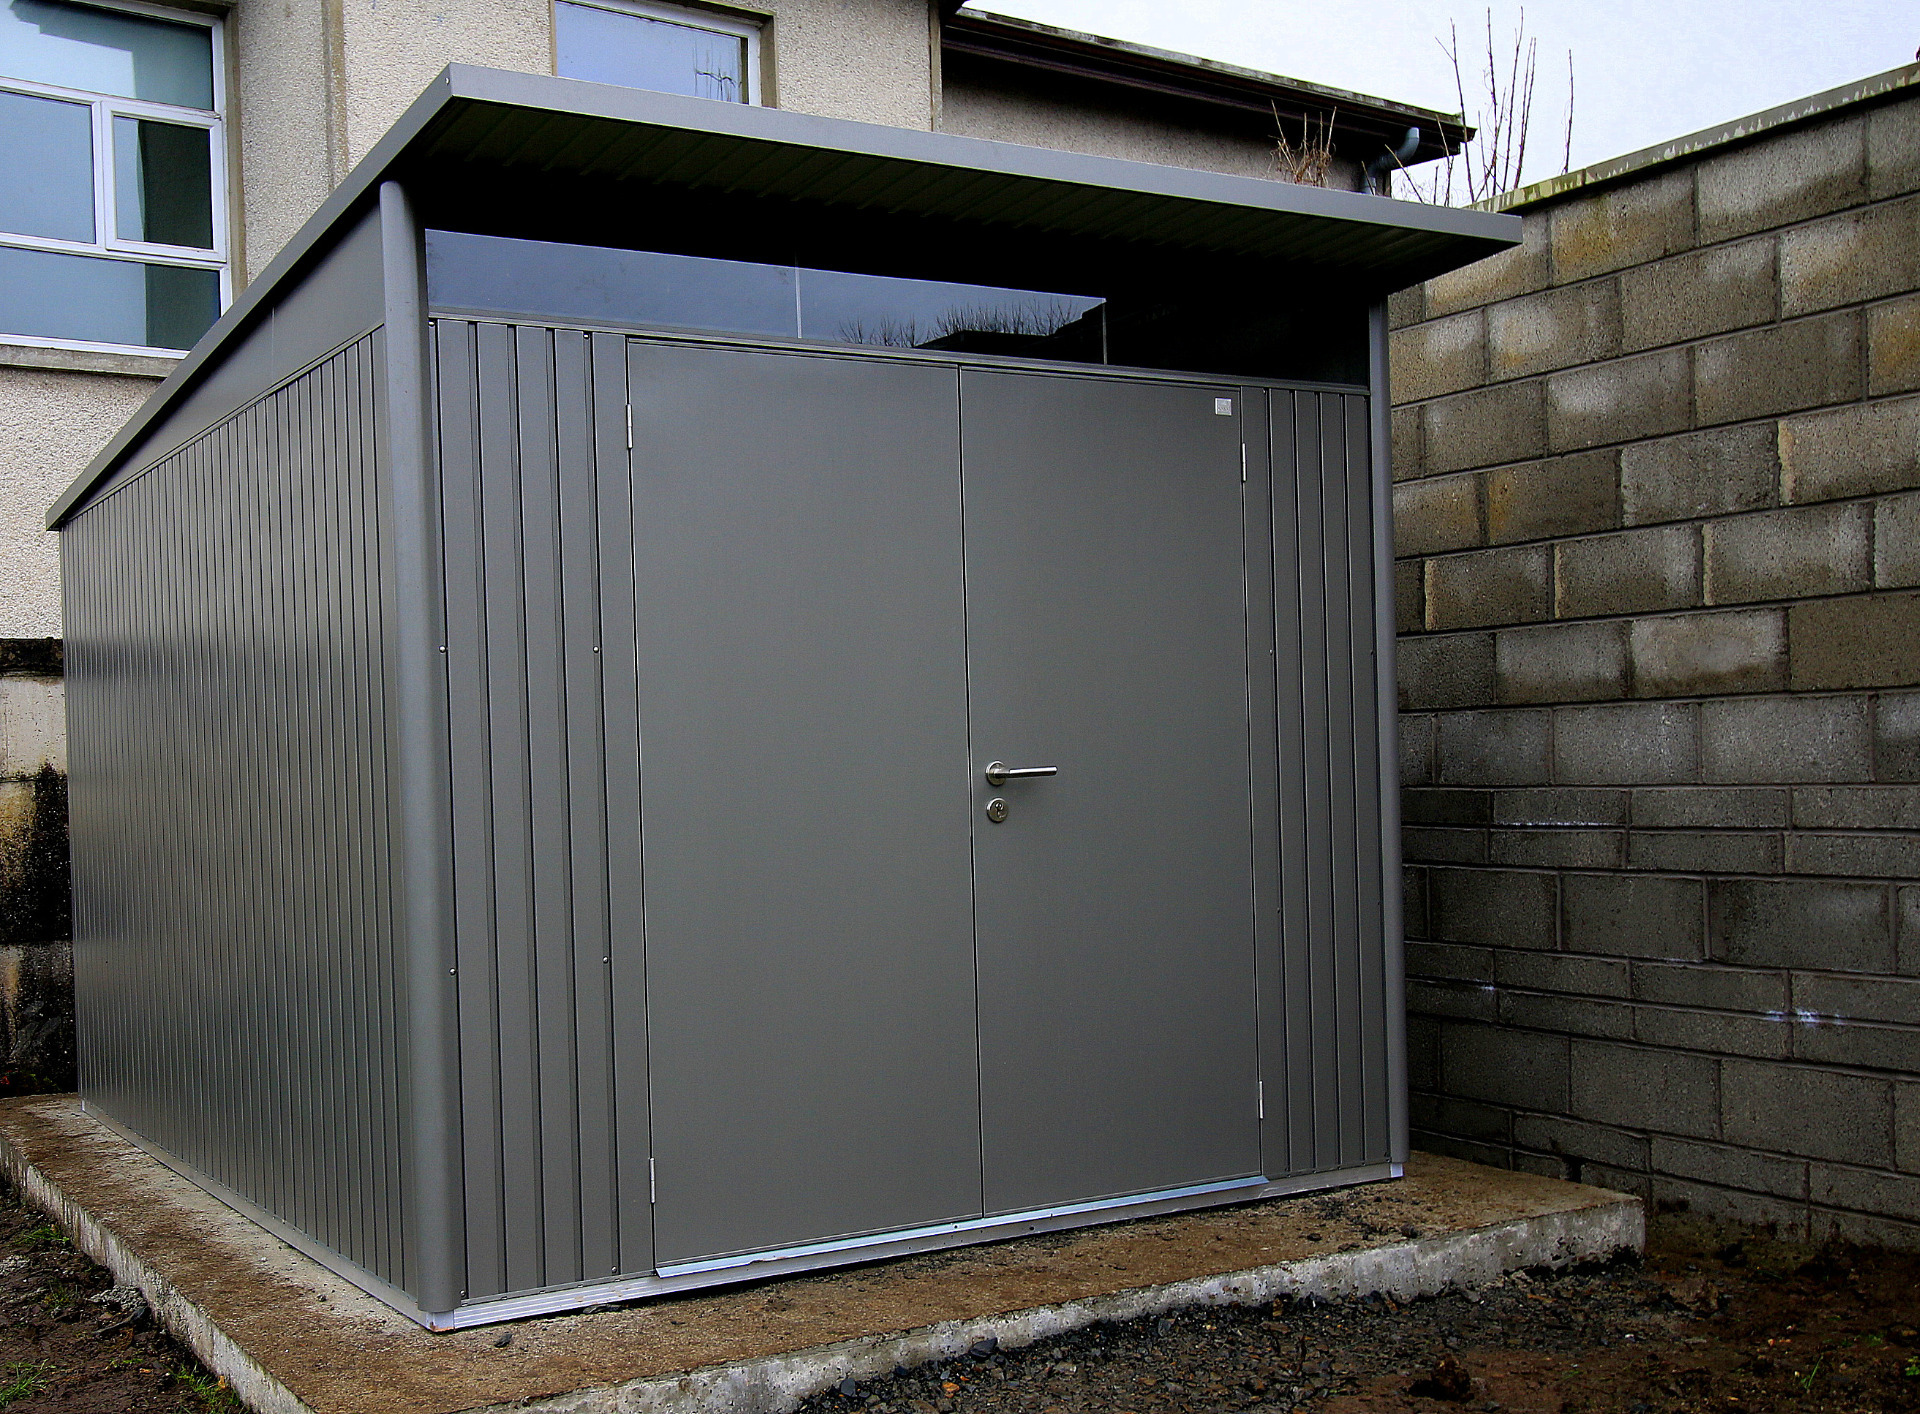 Biohort AvantGarde A8 Steel garden shed in metallic quartz grey with optional accessories | The stylish & secure way to store your garden items